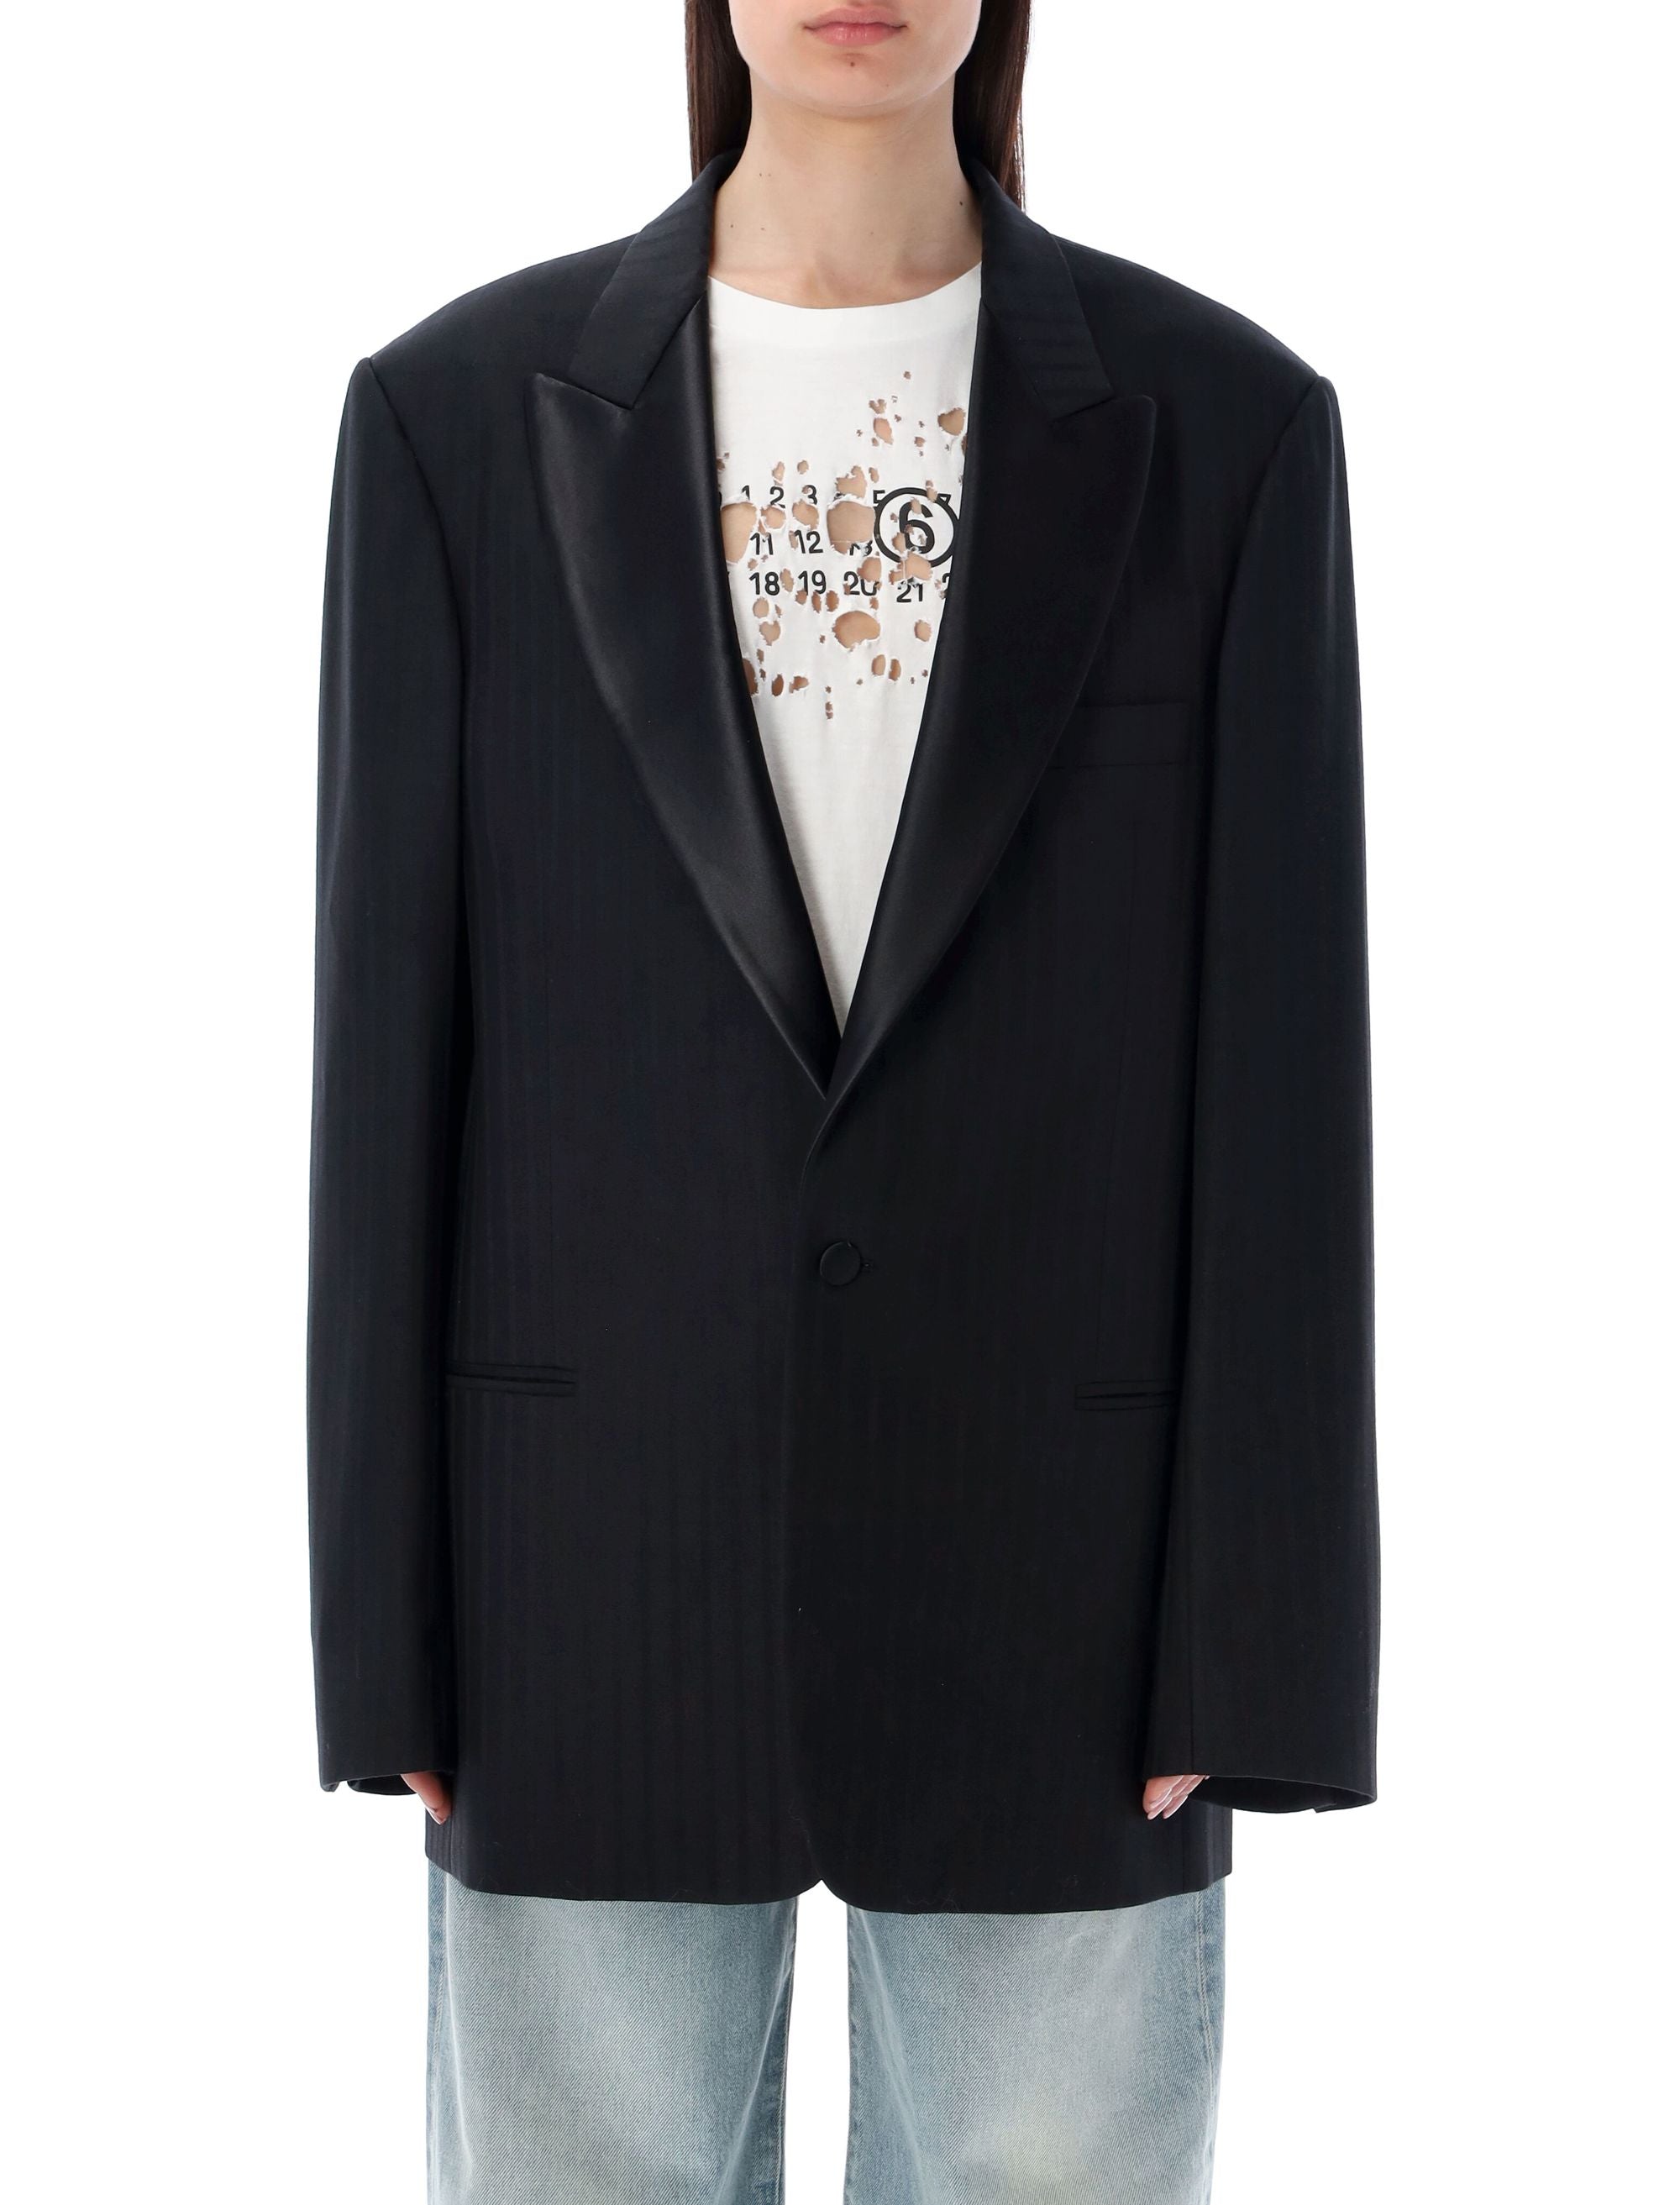 Maison Margiela Black Wool Blazer For Women With Tonal Striped Pattern And Oversized Fit